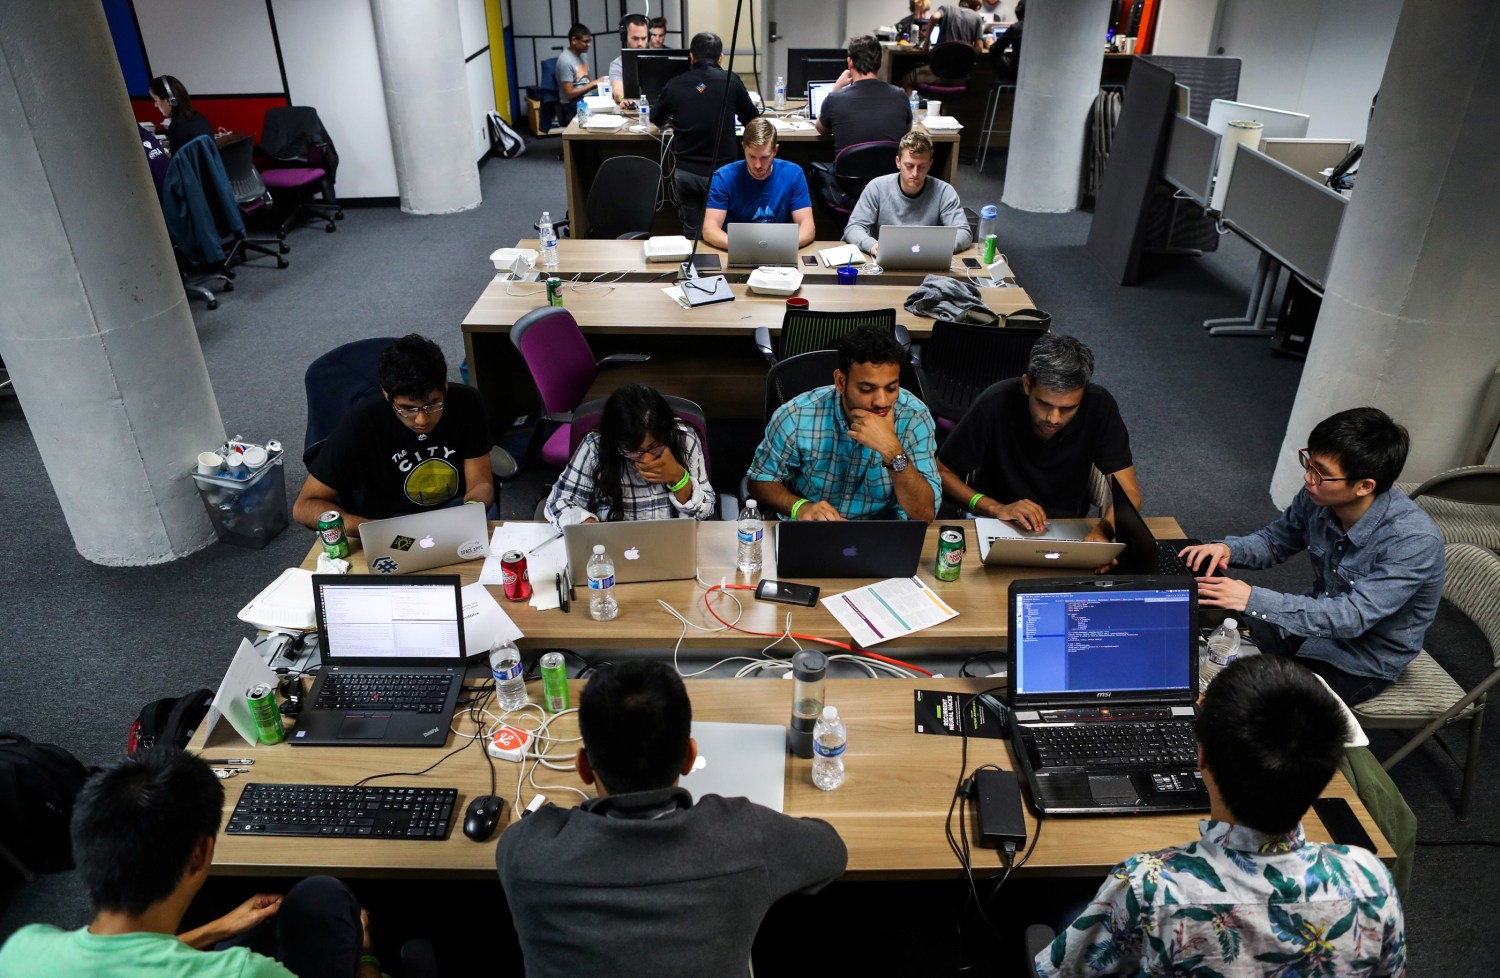 People work on their computers during a weekend Hackathon event in San Francisco, California, U.S. July 16, 2016. REUTERS/Gabrielle Lurie SEARCH "LURIE TECH" FOR THIS STORY. SEARCH "WIDER IMAGE" FOR ALL STORIES. - RC1E2E809C80